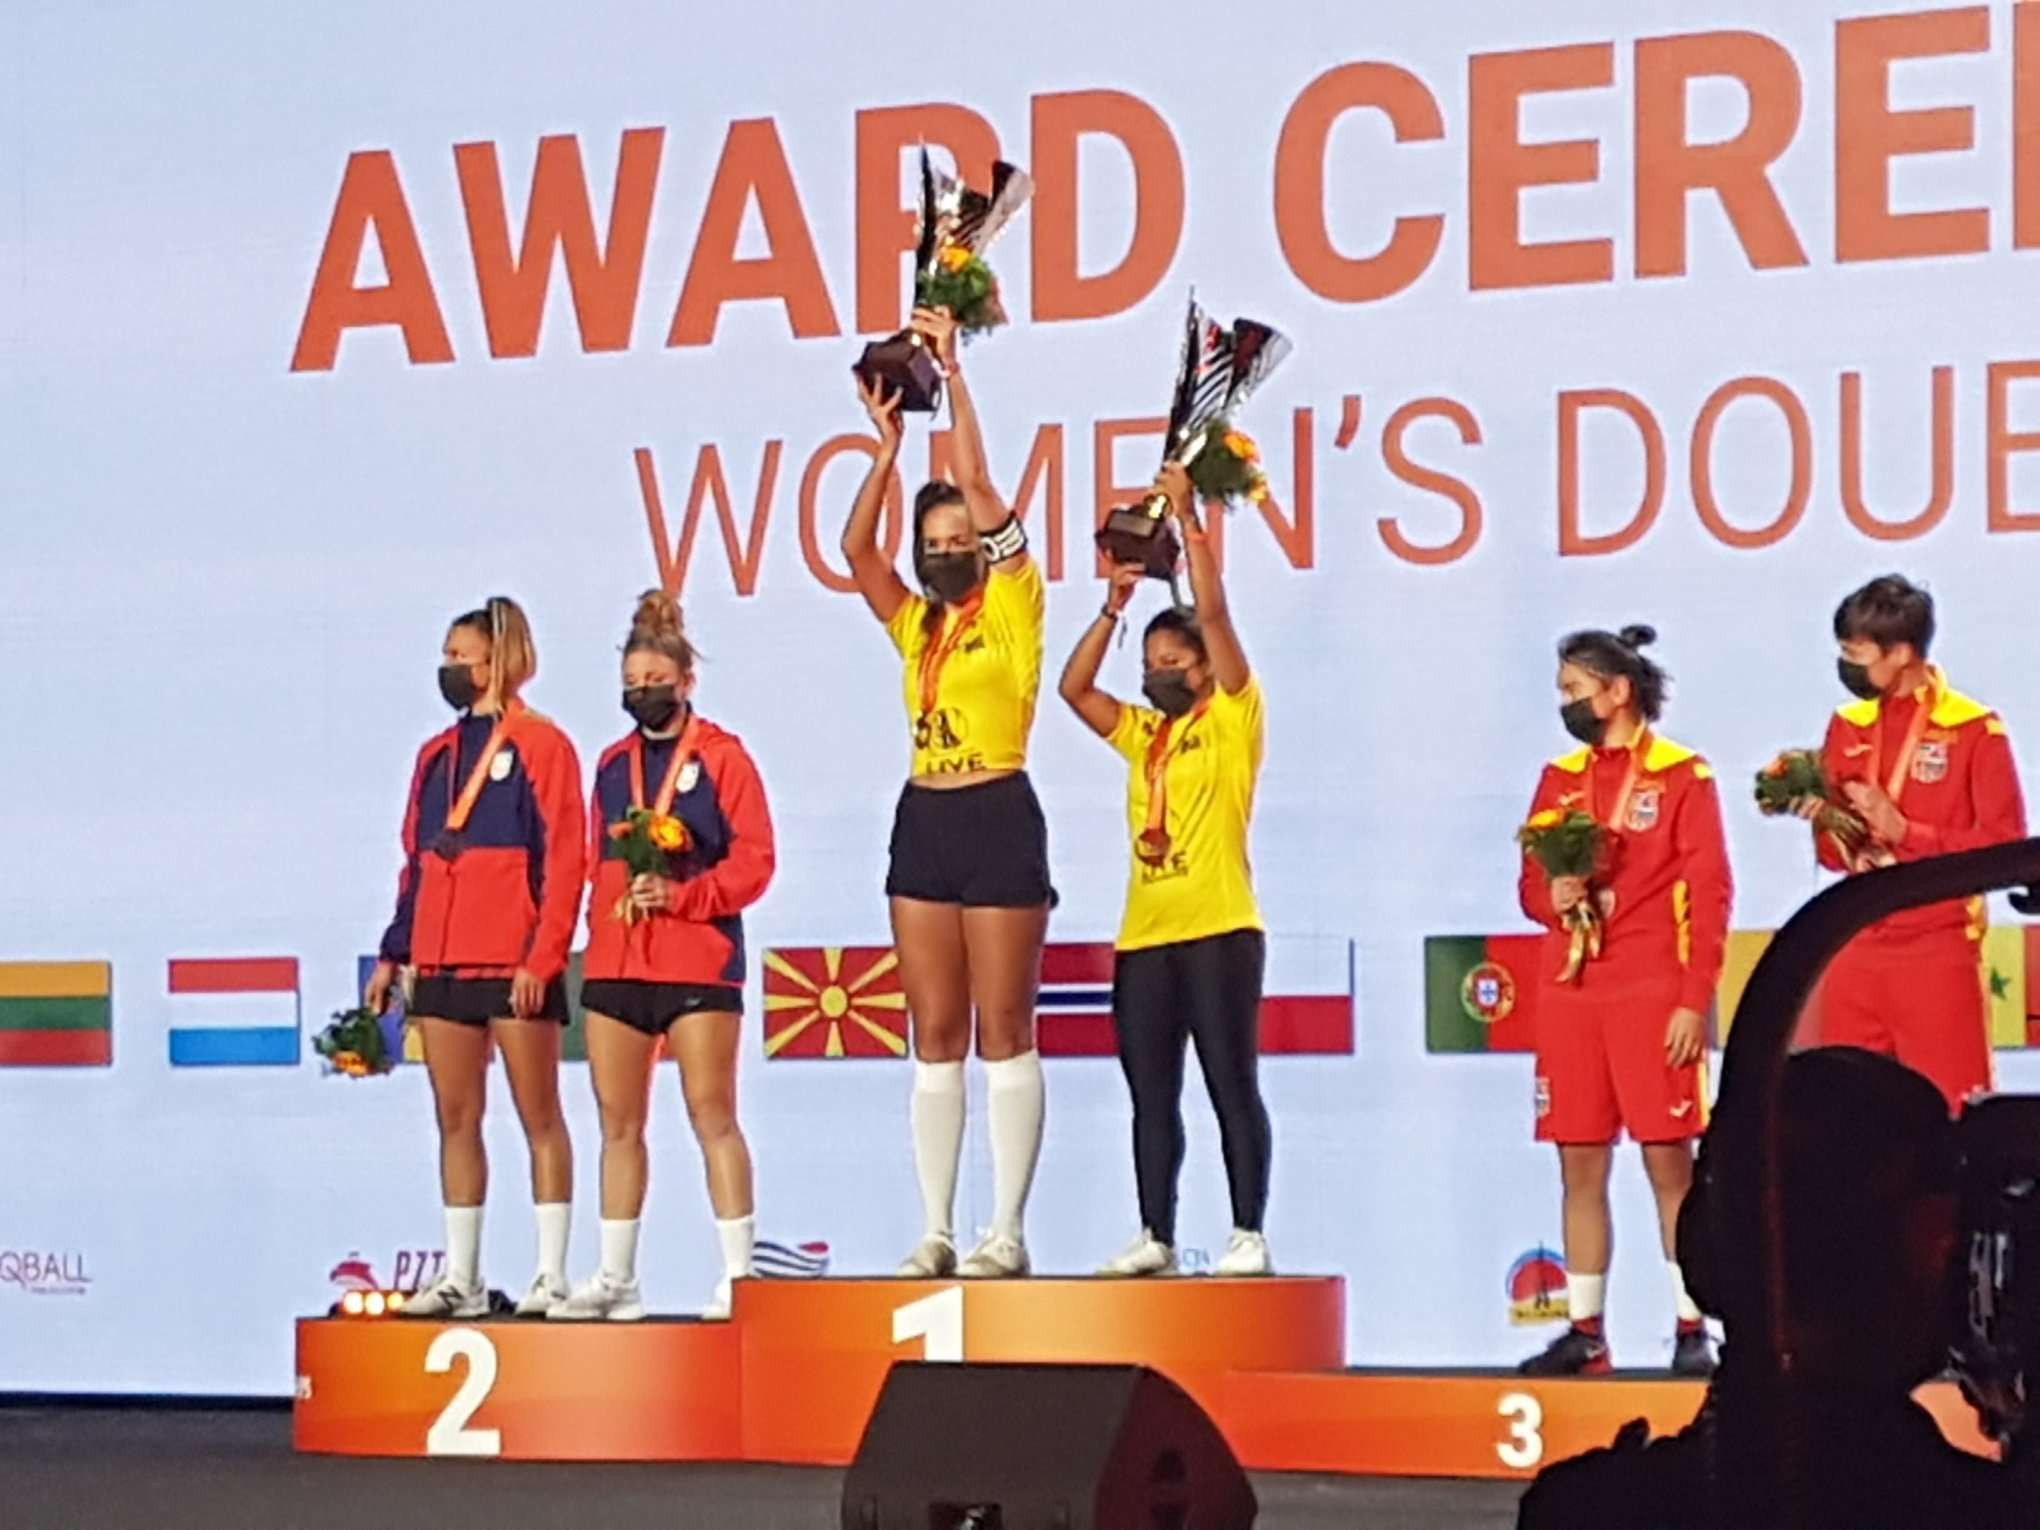 Guitler crowned women's doubles champion after injury woe at Teqball World Championships